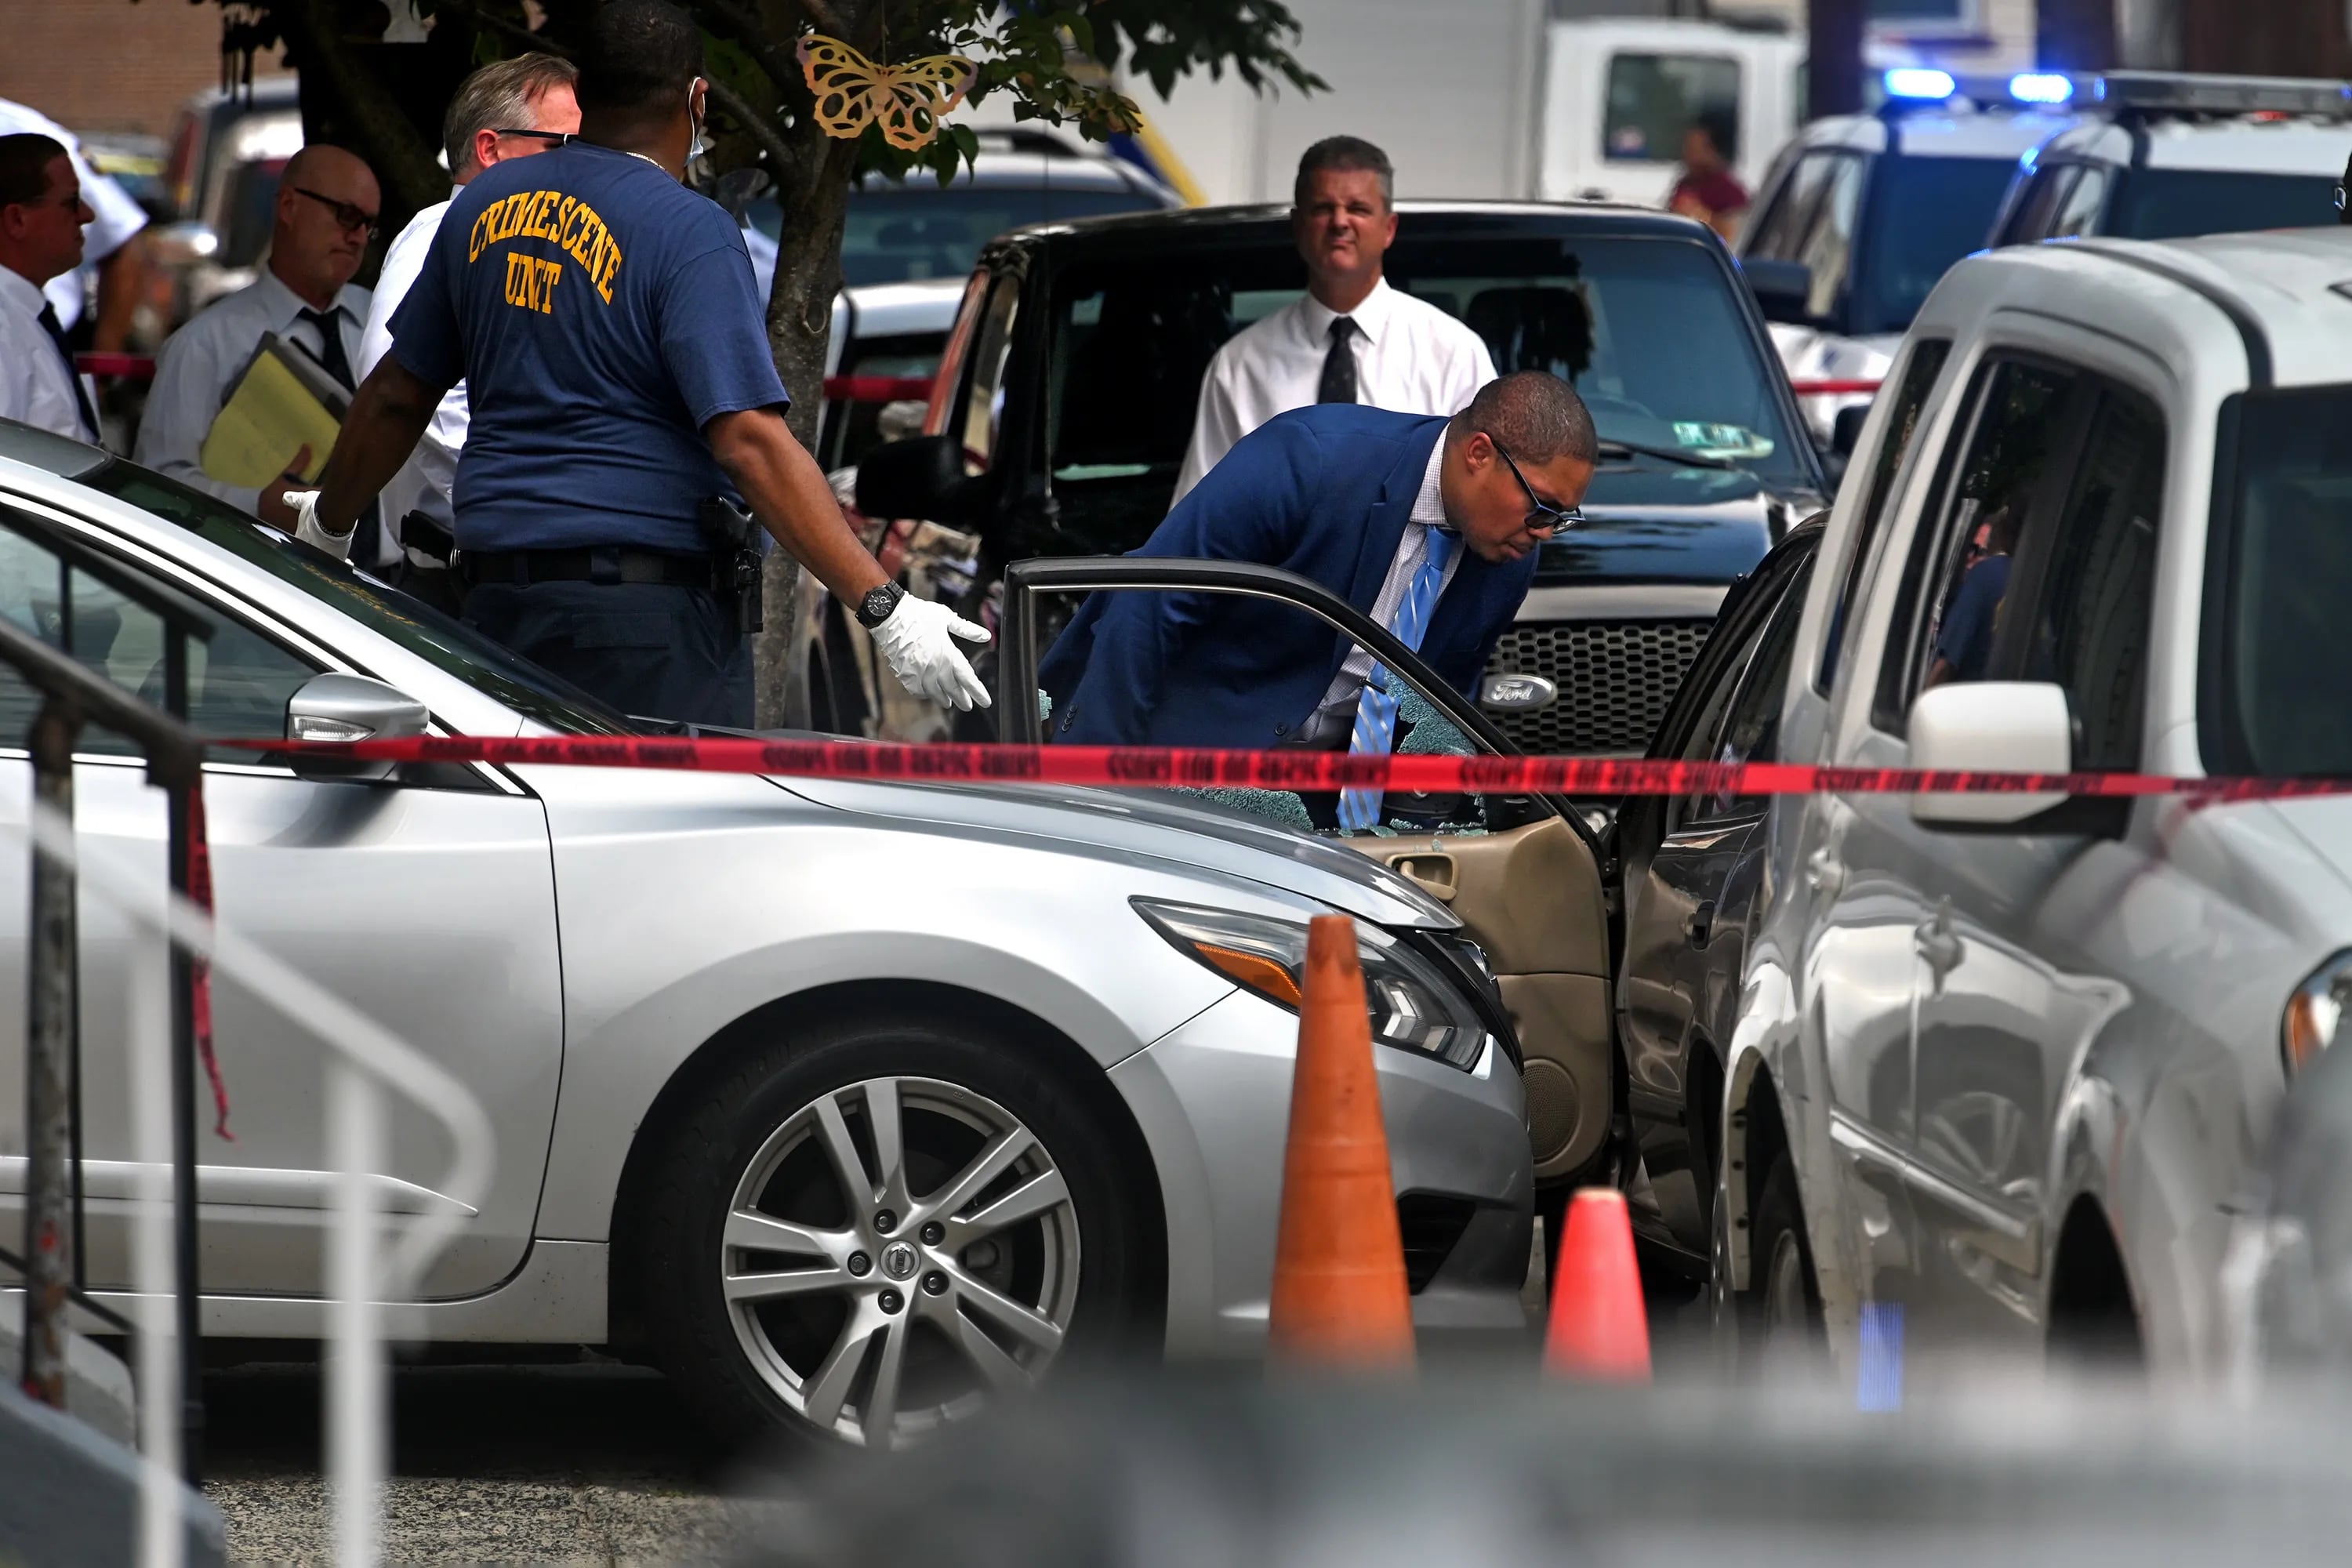 Shattered glass is visible in the drivers side window of the gold Toyota Corolla that Eddie Irizarry was driving as police investigators are on the scene in the 100 block of East Willard Street on Aug. 14. Contrary to initial statements by the police, commissioner Danielle Outlaw later said Irizarry was in his car when he was fatally shot.